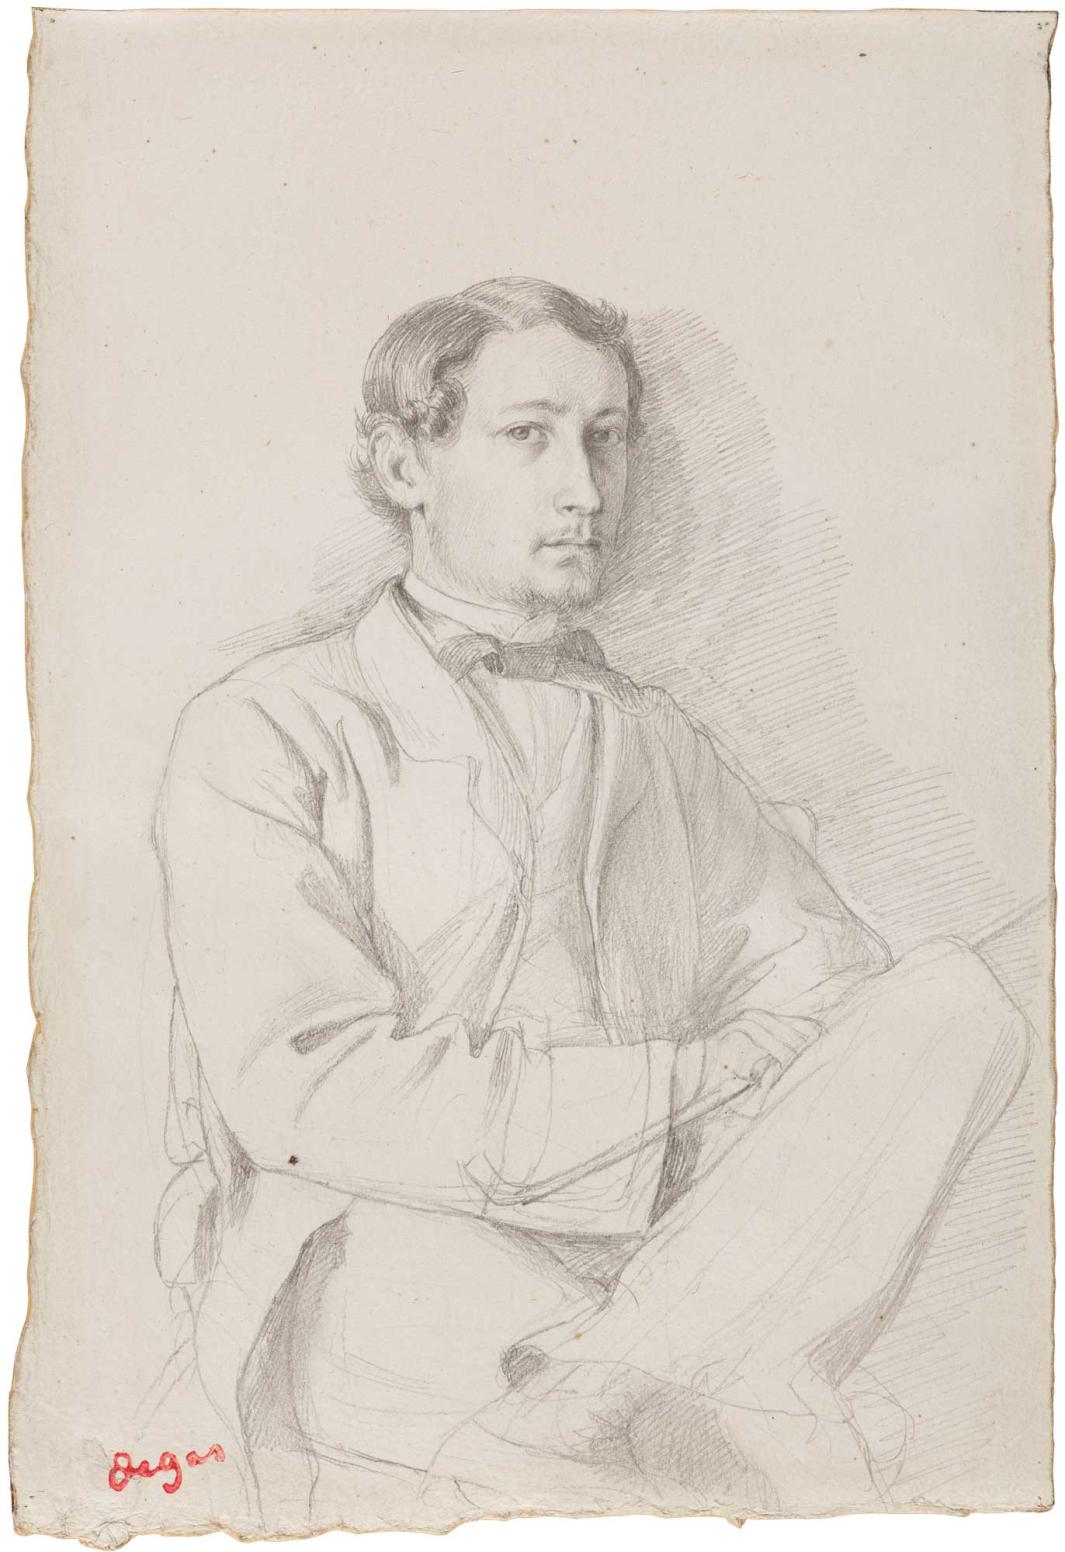 Black and white drawing of a man with short hair seated, with left leg bent resting on right leg